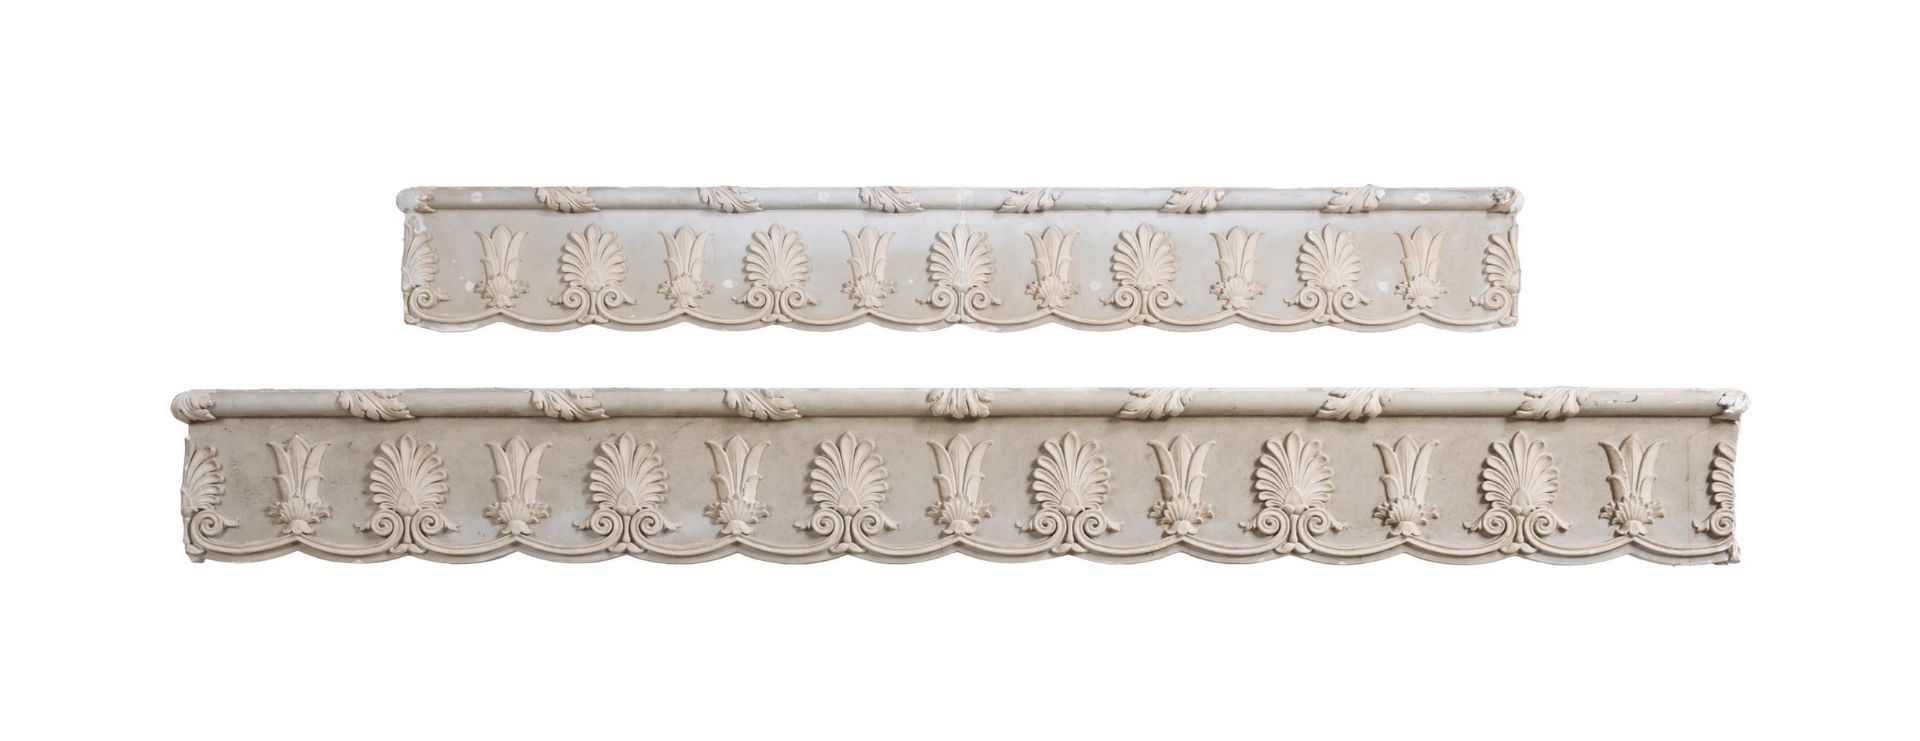 ANOTHER SET OF FOUR PAINTED PLASTER AND WOOD CURTAIN PELMETS, 20TH CENTURY IN THE REGENCY STYLE - Image 4 of 5